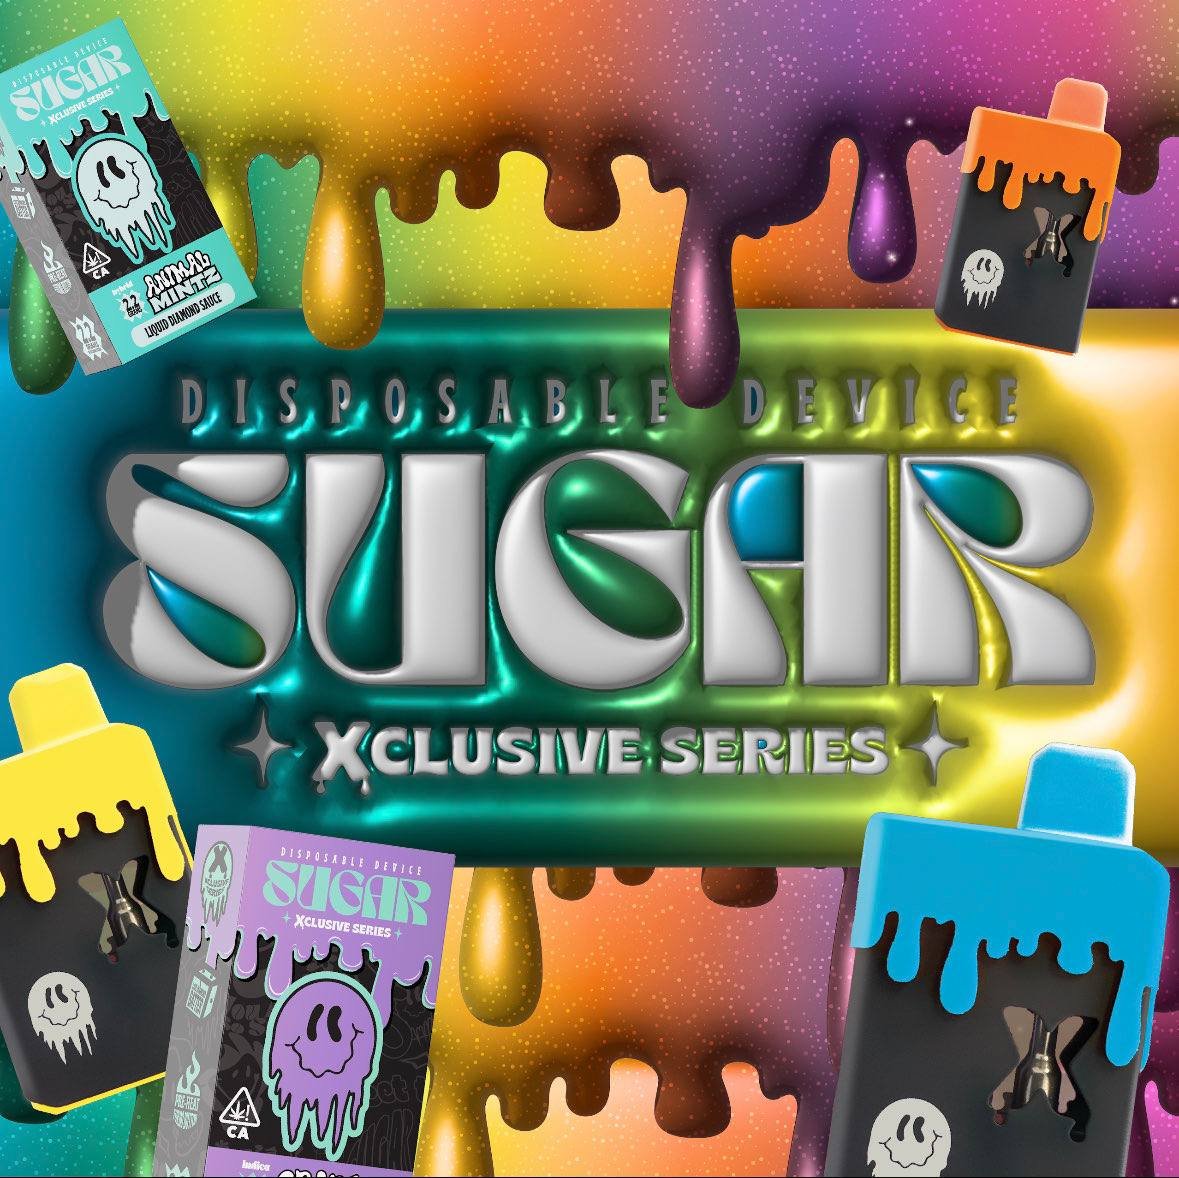 Introducing the SUGAR Xclusive Series Liquid Diamond Sauce disposable vape carts. Experience the unmatched purity and potency of these premium carts. With flavors like Watermelon Skittlz and Blueberry Banana Pancake, they are carefully crafted to satisfy your taste buds. These sleek 2.2-gram carts are not only convenient for on-the-go use but also offer longevity. Whether you're new to vaping or a seasoned vaper, the SUGAR Xclusive Series will take your vaping to the next level.